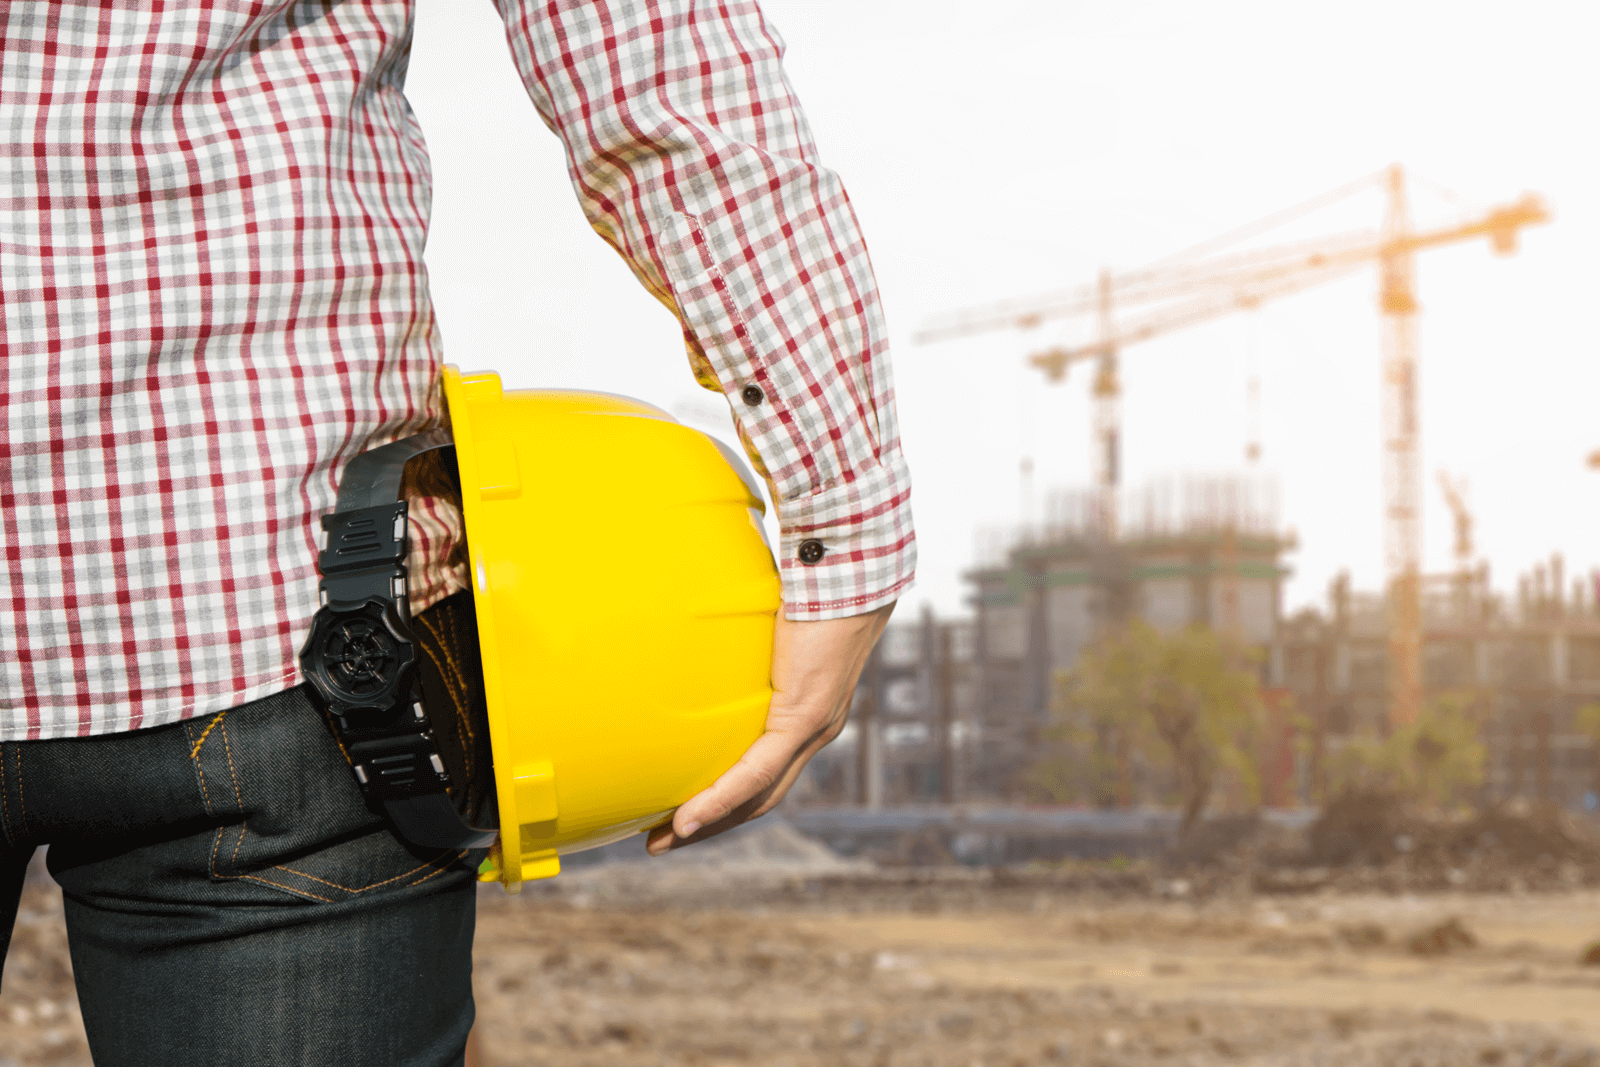 5 Points to Consider When Choosing a General Contractor